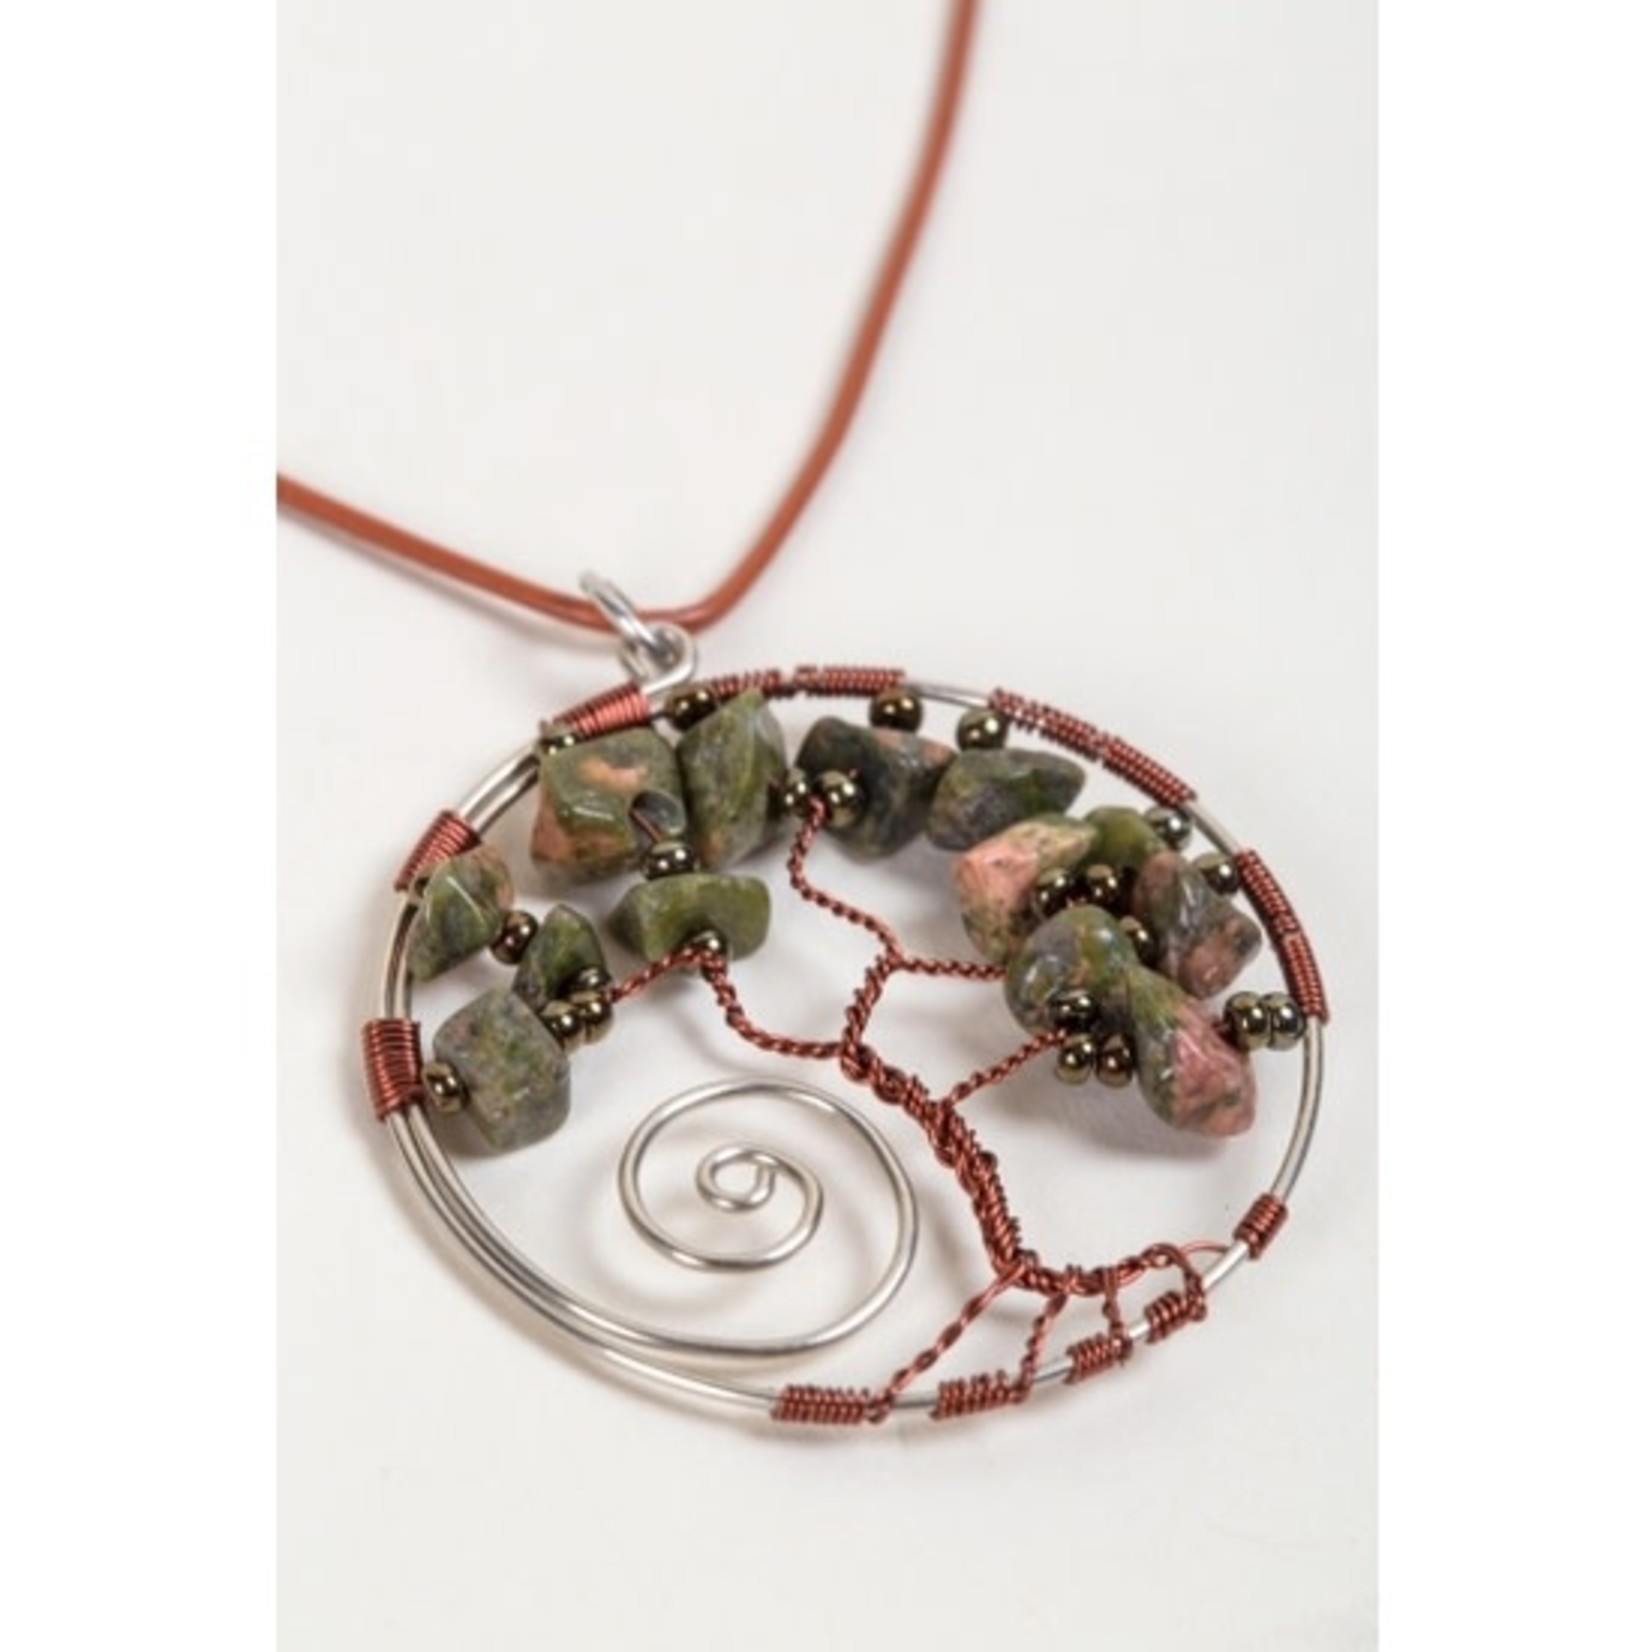 Ten Thousand Villages USA Twisted Tree Necklace, Guatemala